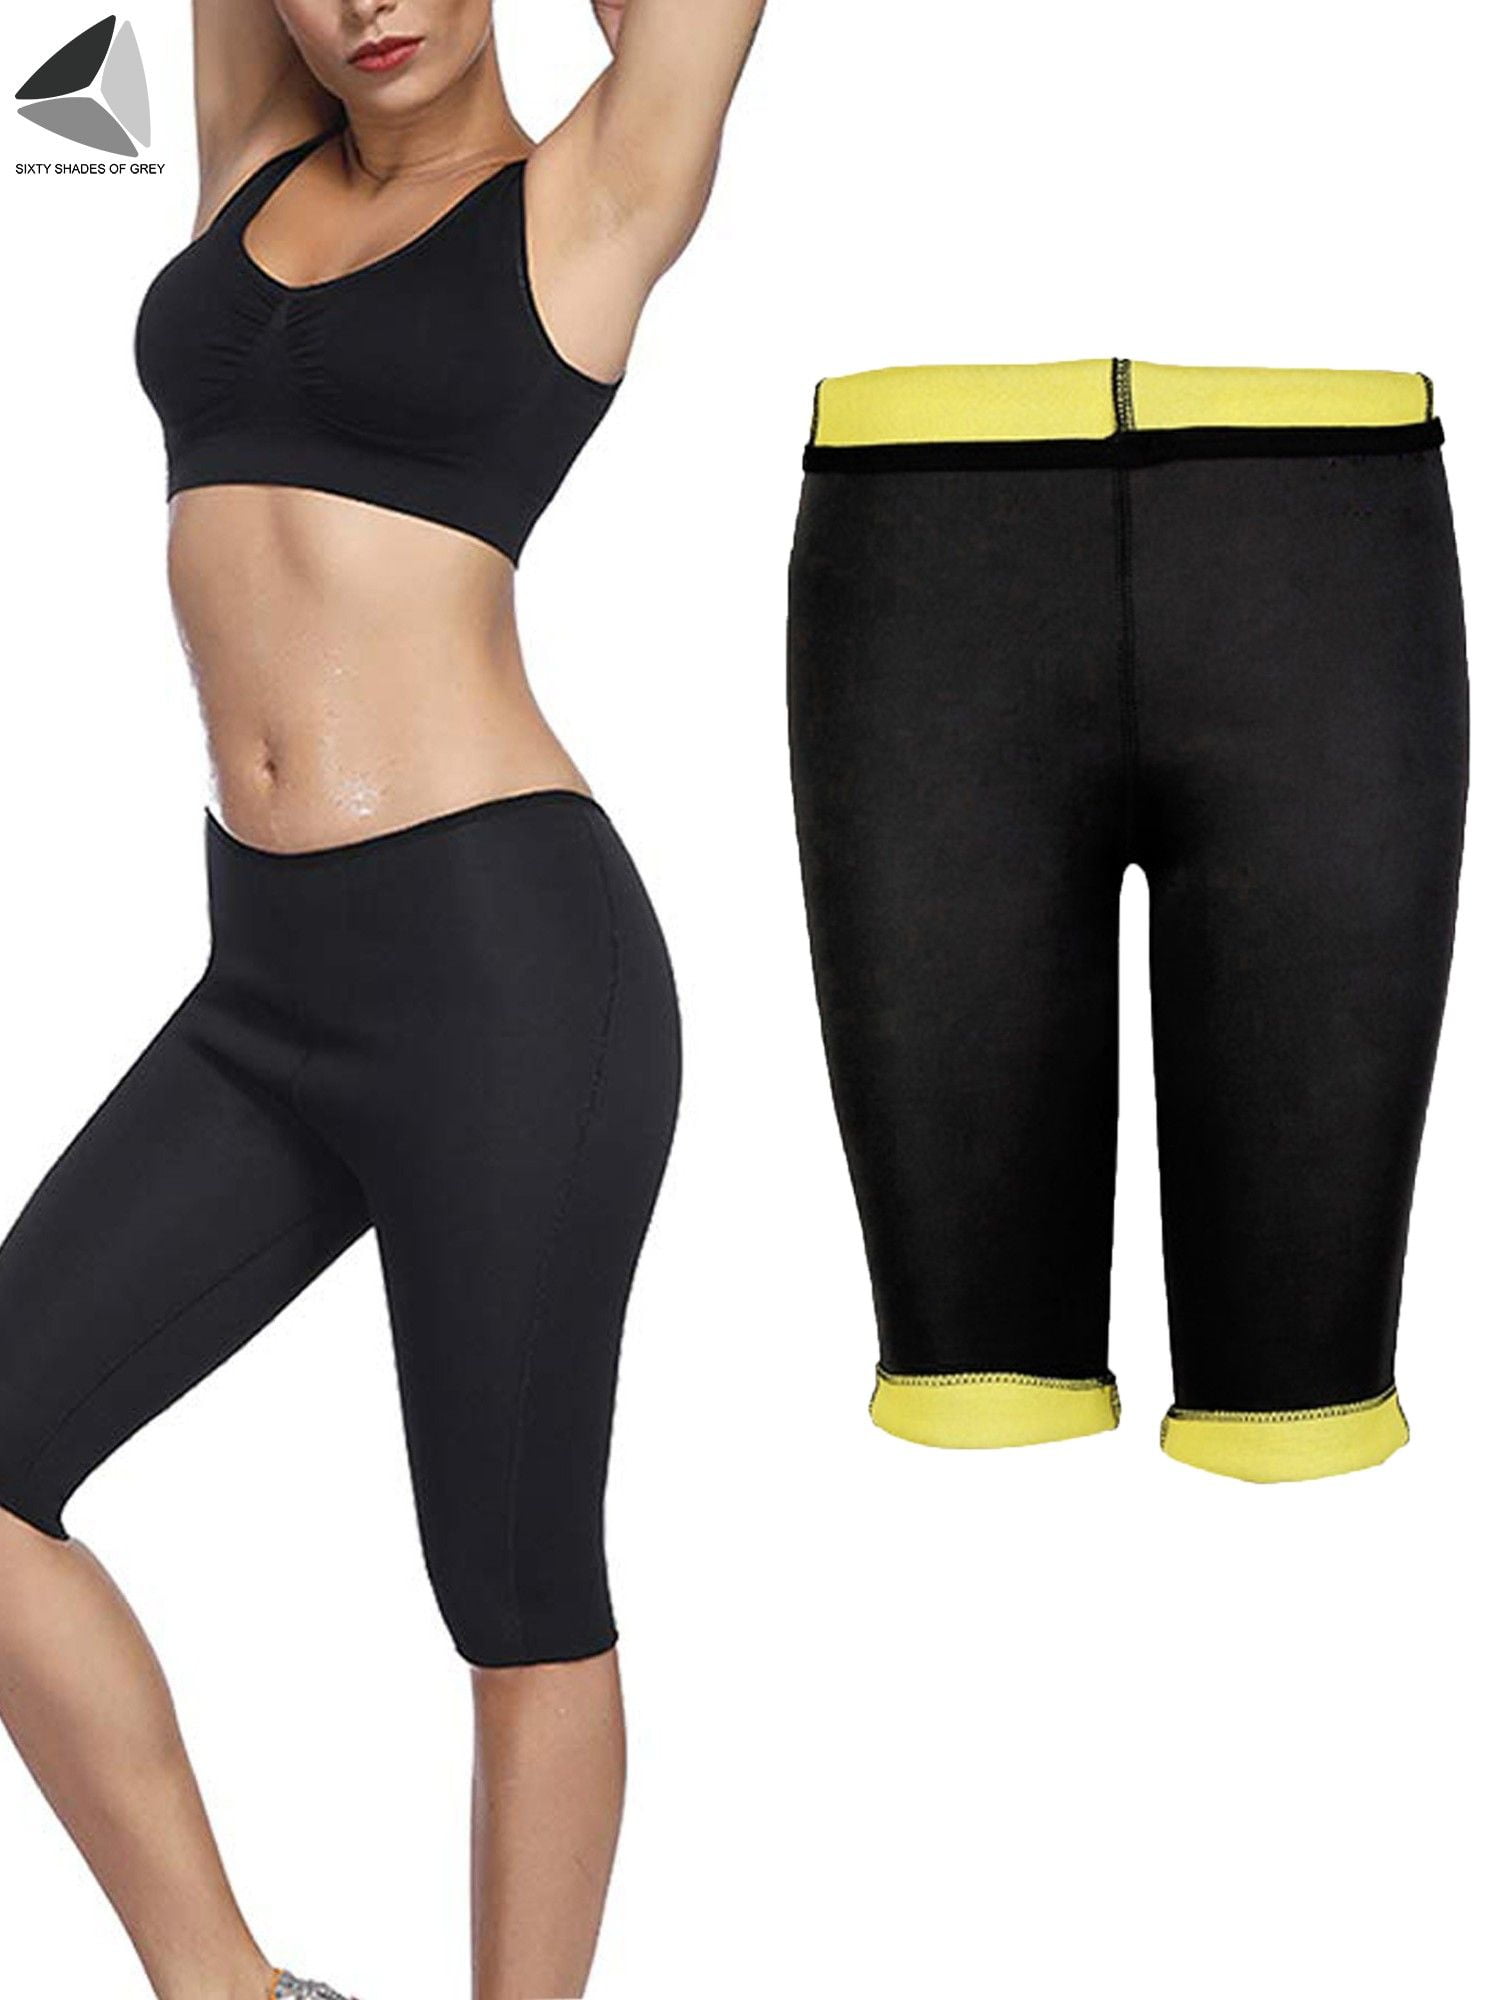 Fashion Women Thermo Body Shaper Slimming Pants Sier Weight Loss